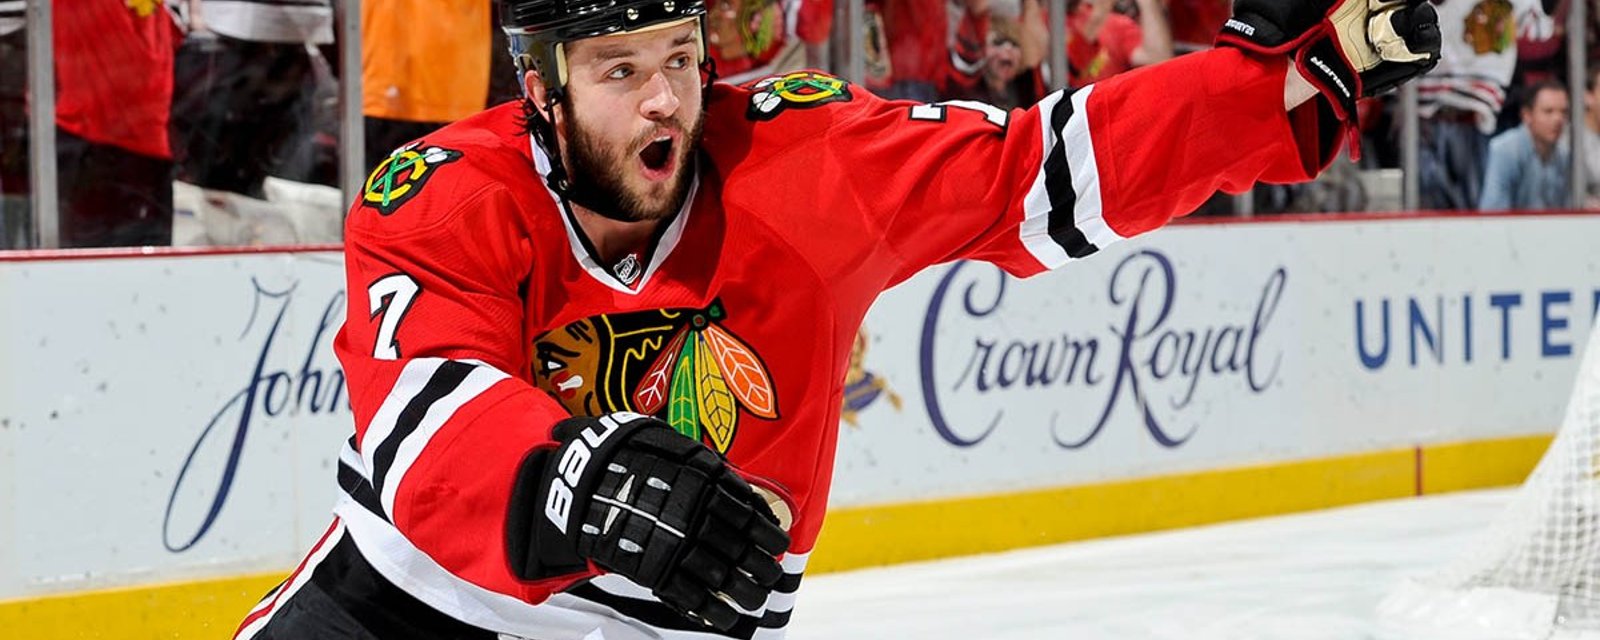 Brent Seabrook accroche ses patins